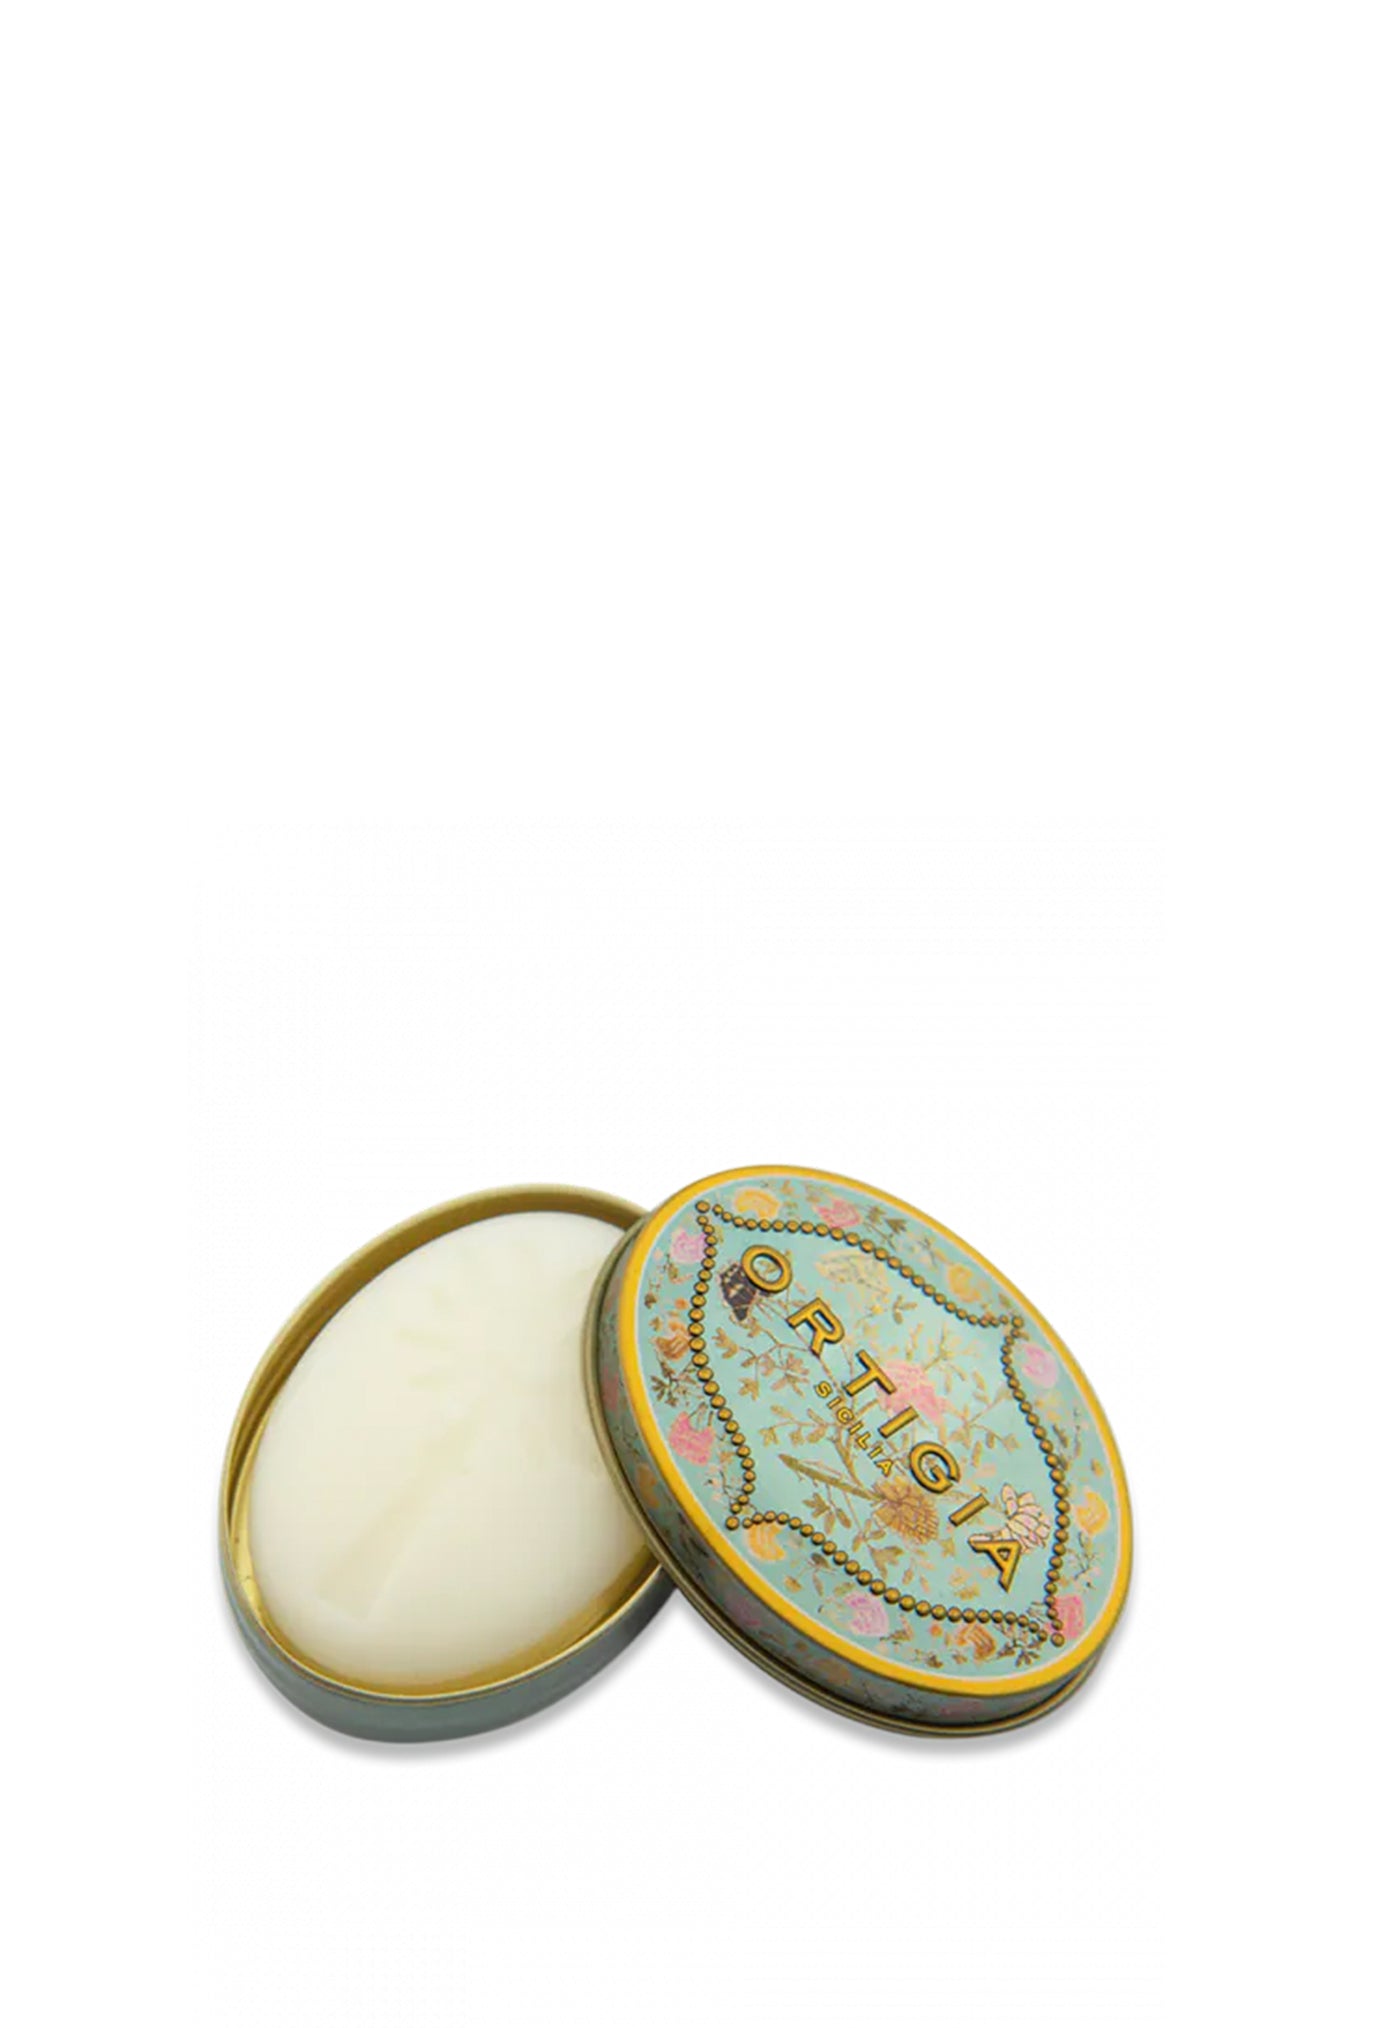 Florio Soap 25g In Tin sold by Angel Divine